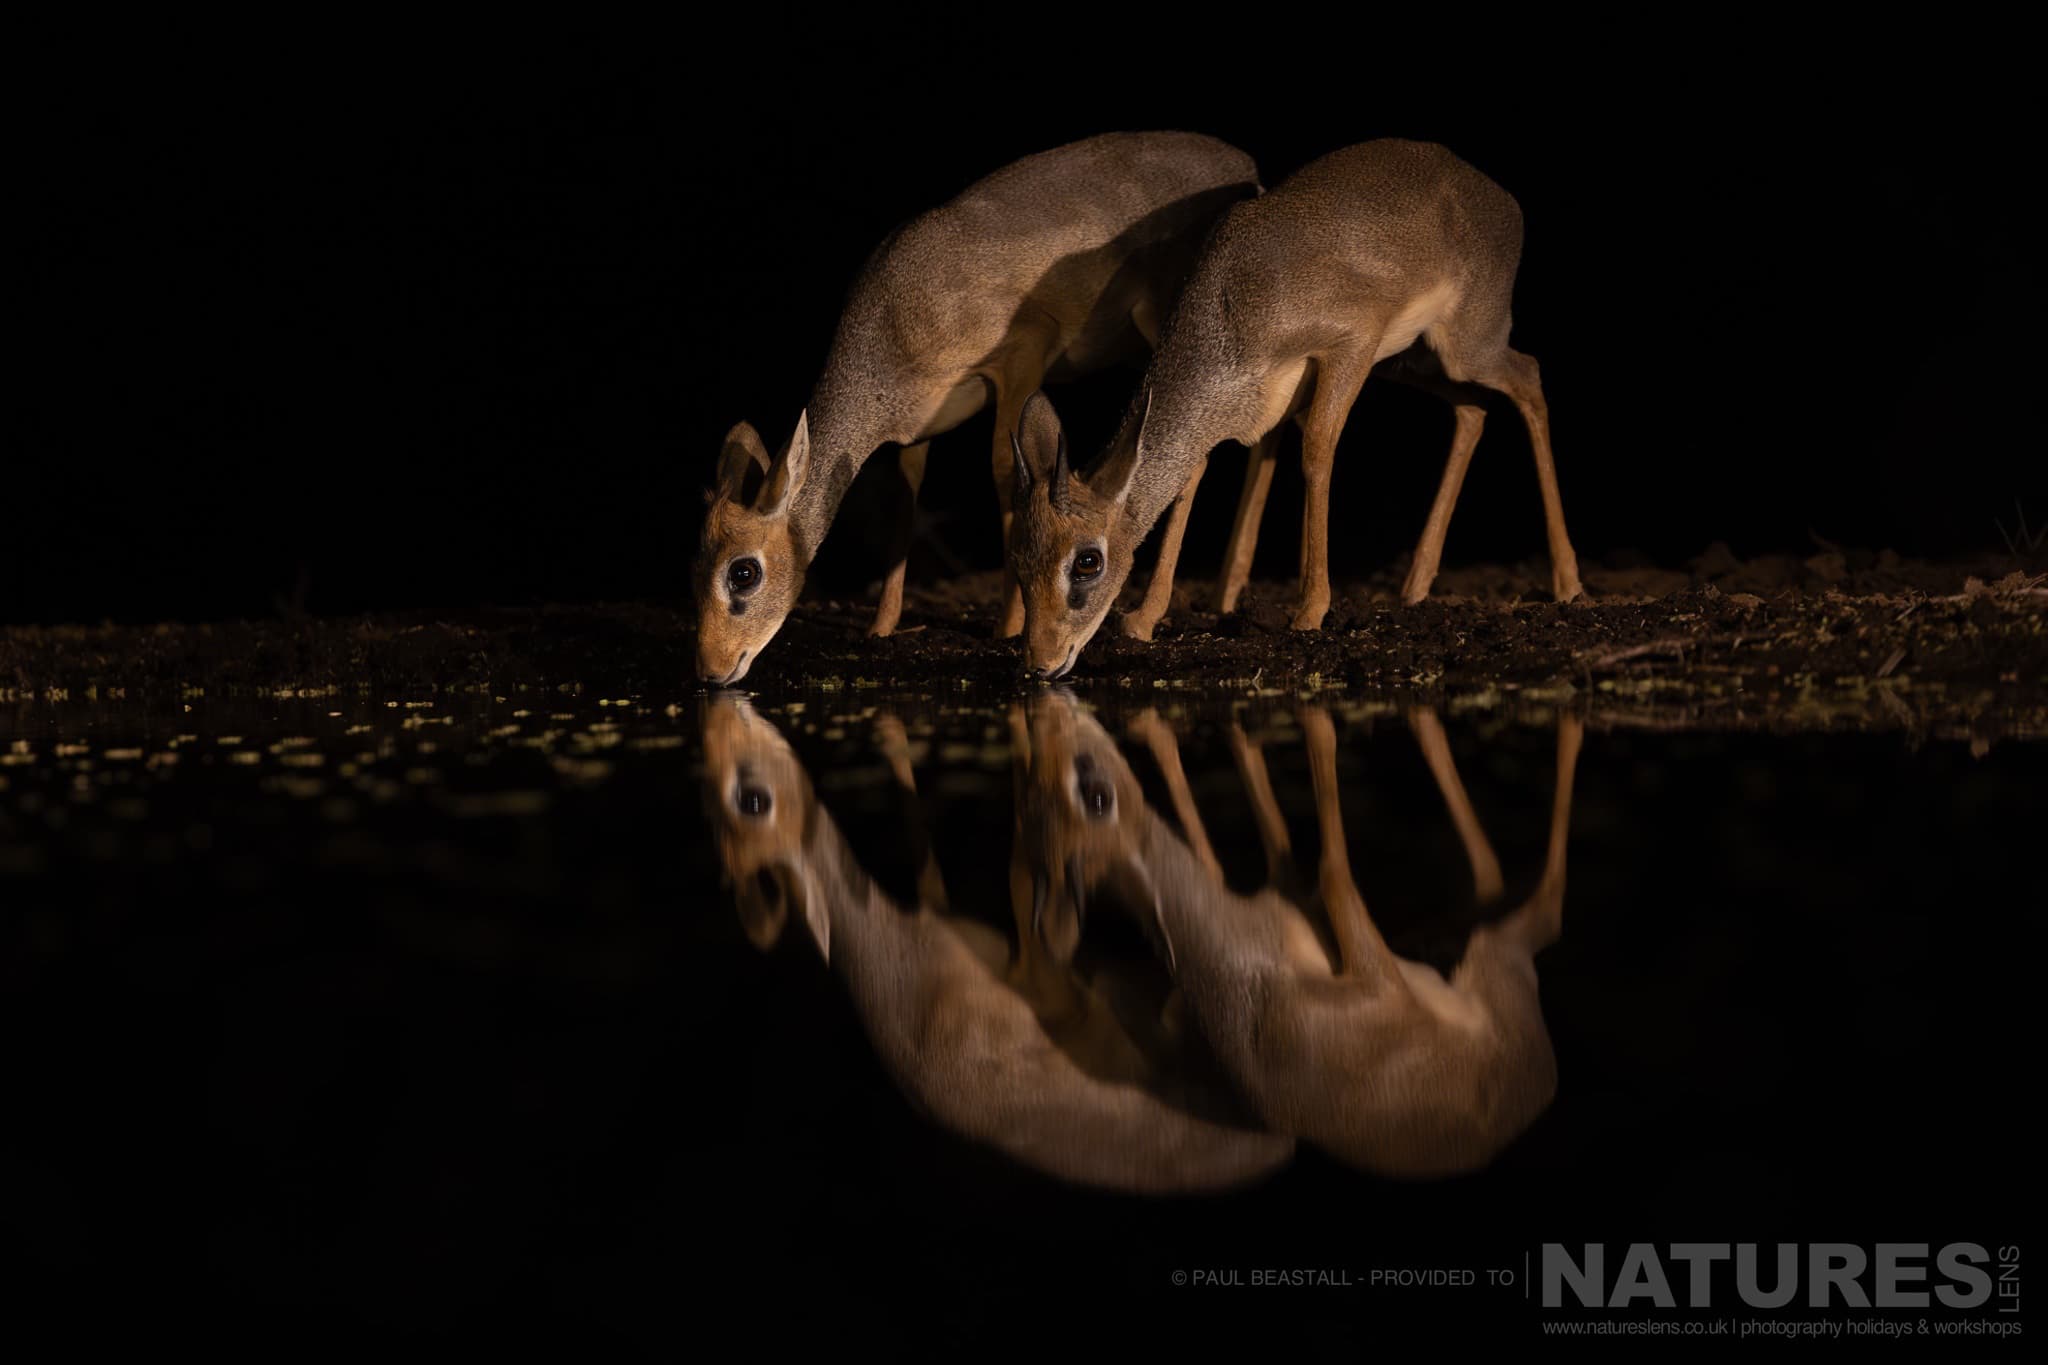 A Pair Of Dikdik Drinking From The Waterhole At Night Photographed By Paul Beastall During A Photography Holiday At Lentorre Lodge With Natureslens